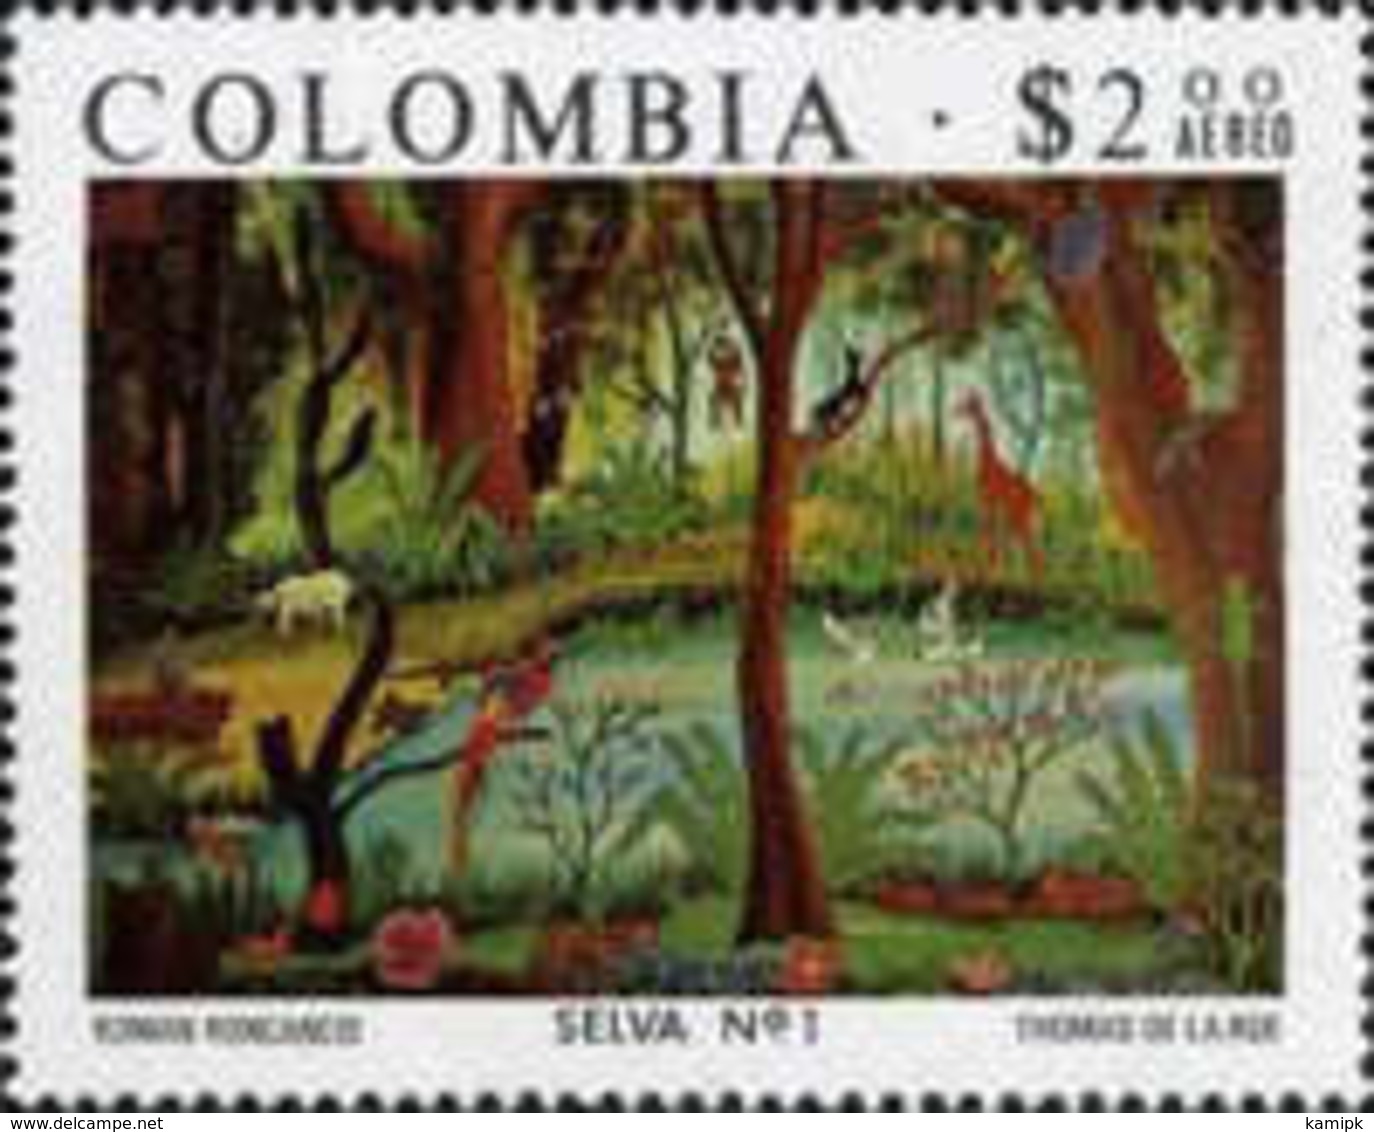 USED STAMP Colombia - Airmail - Colombian Art -1975 - Colombia